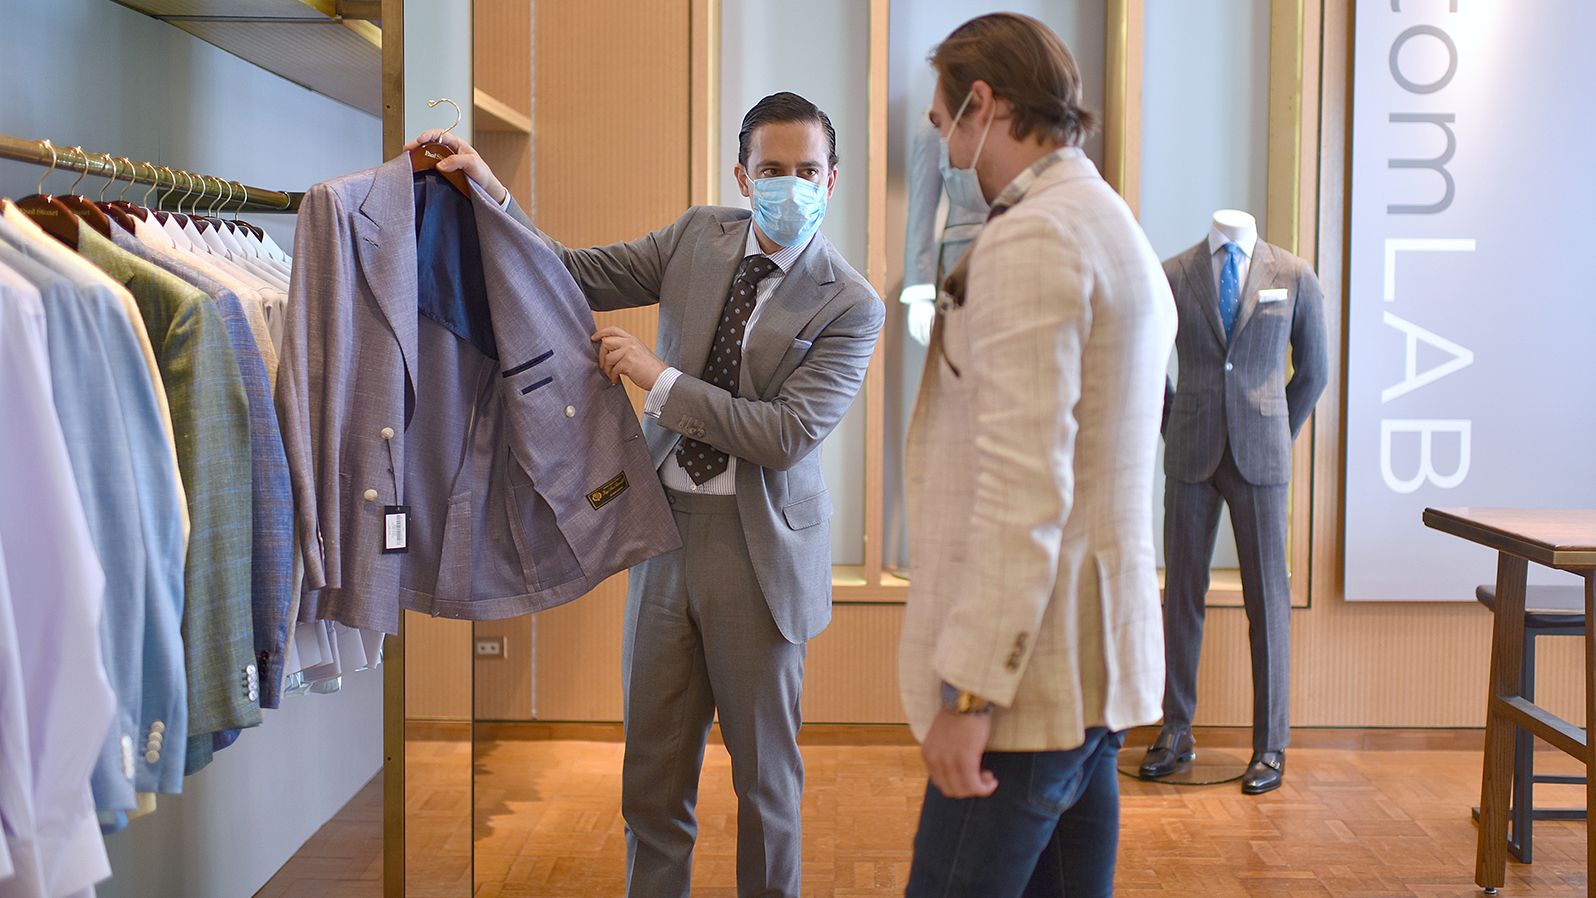 Trevor Shimpfky helps a customer select a suit from Custom LAB in New York City on June 22.